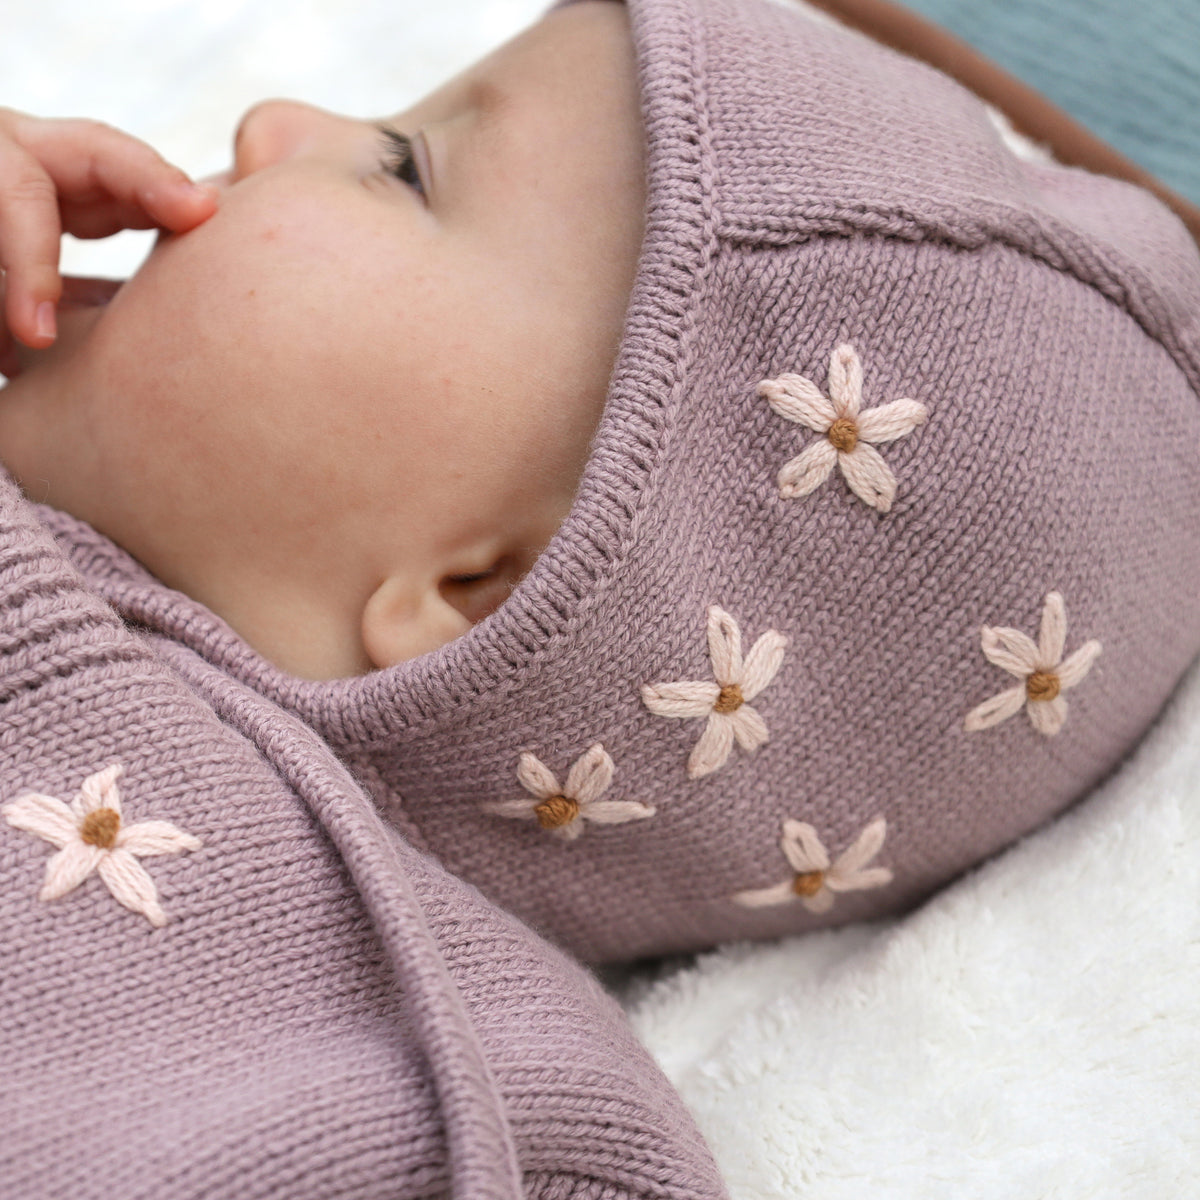 oh baby! Knitted Pilot Cap - Embroidered Pink Daisies - Dusty Lavender